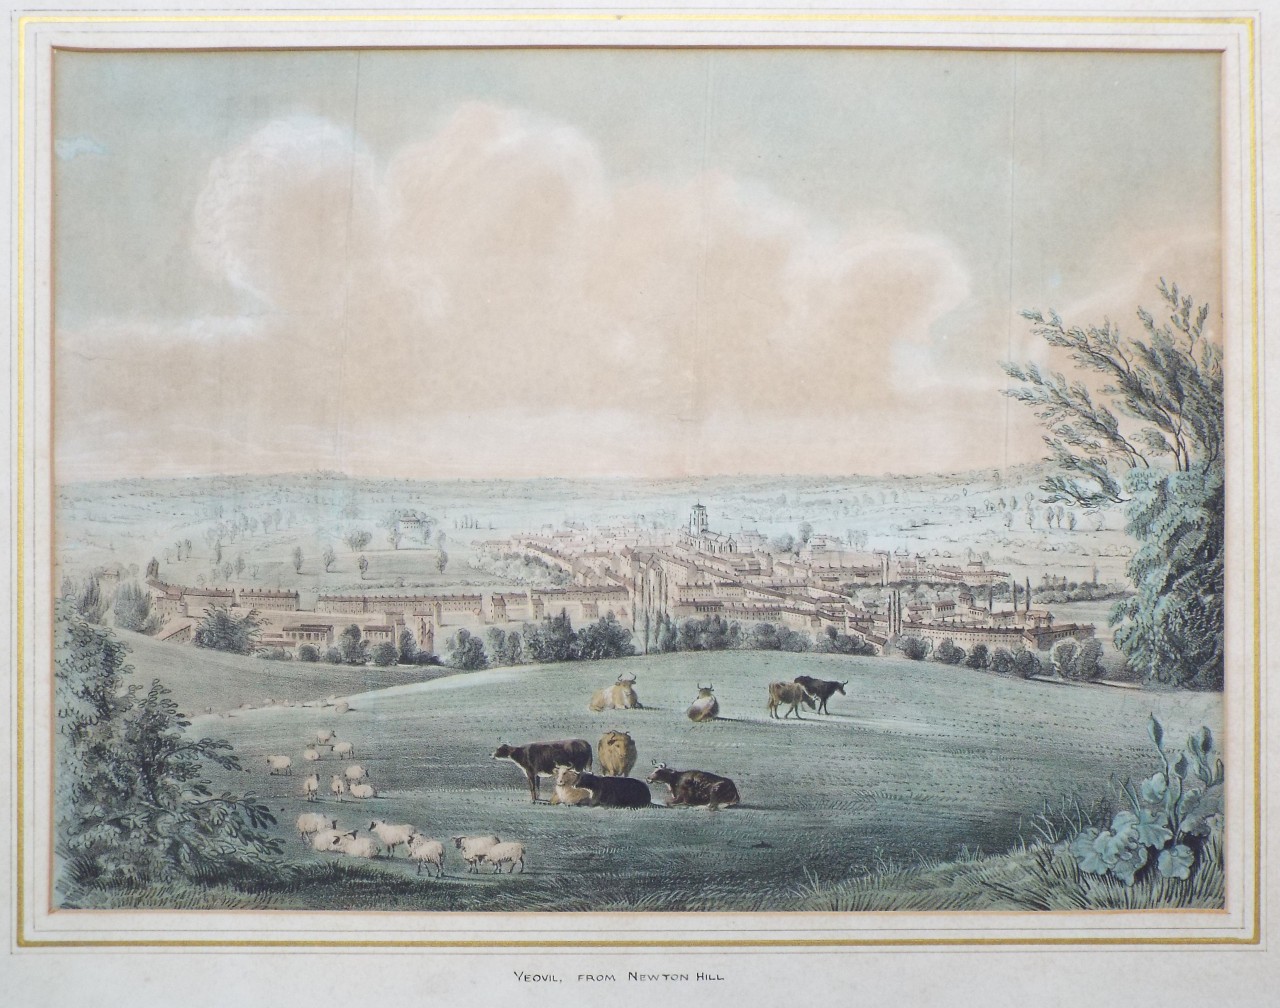 Lithograph - Yeovil, from Newton Hill